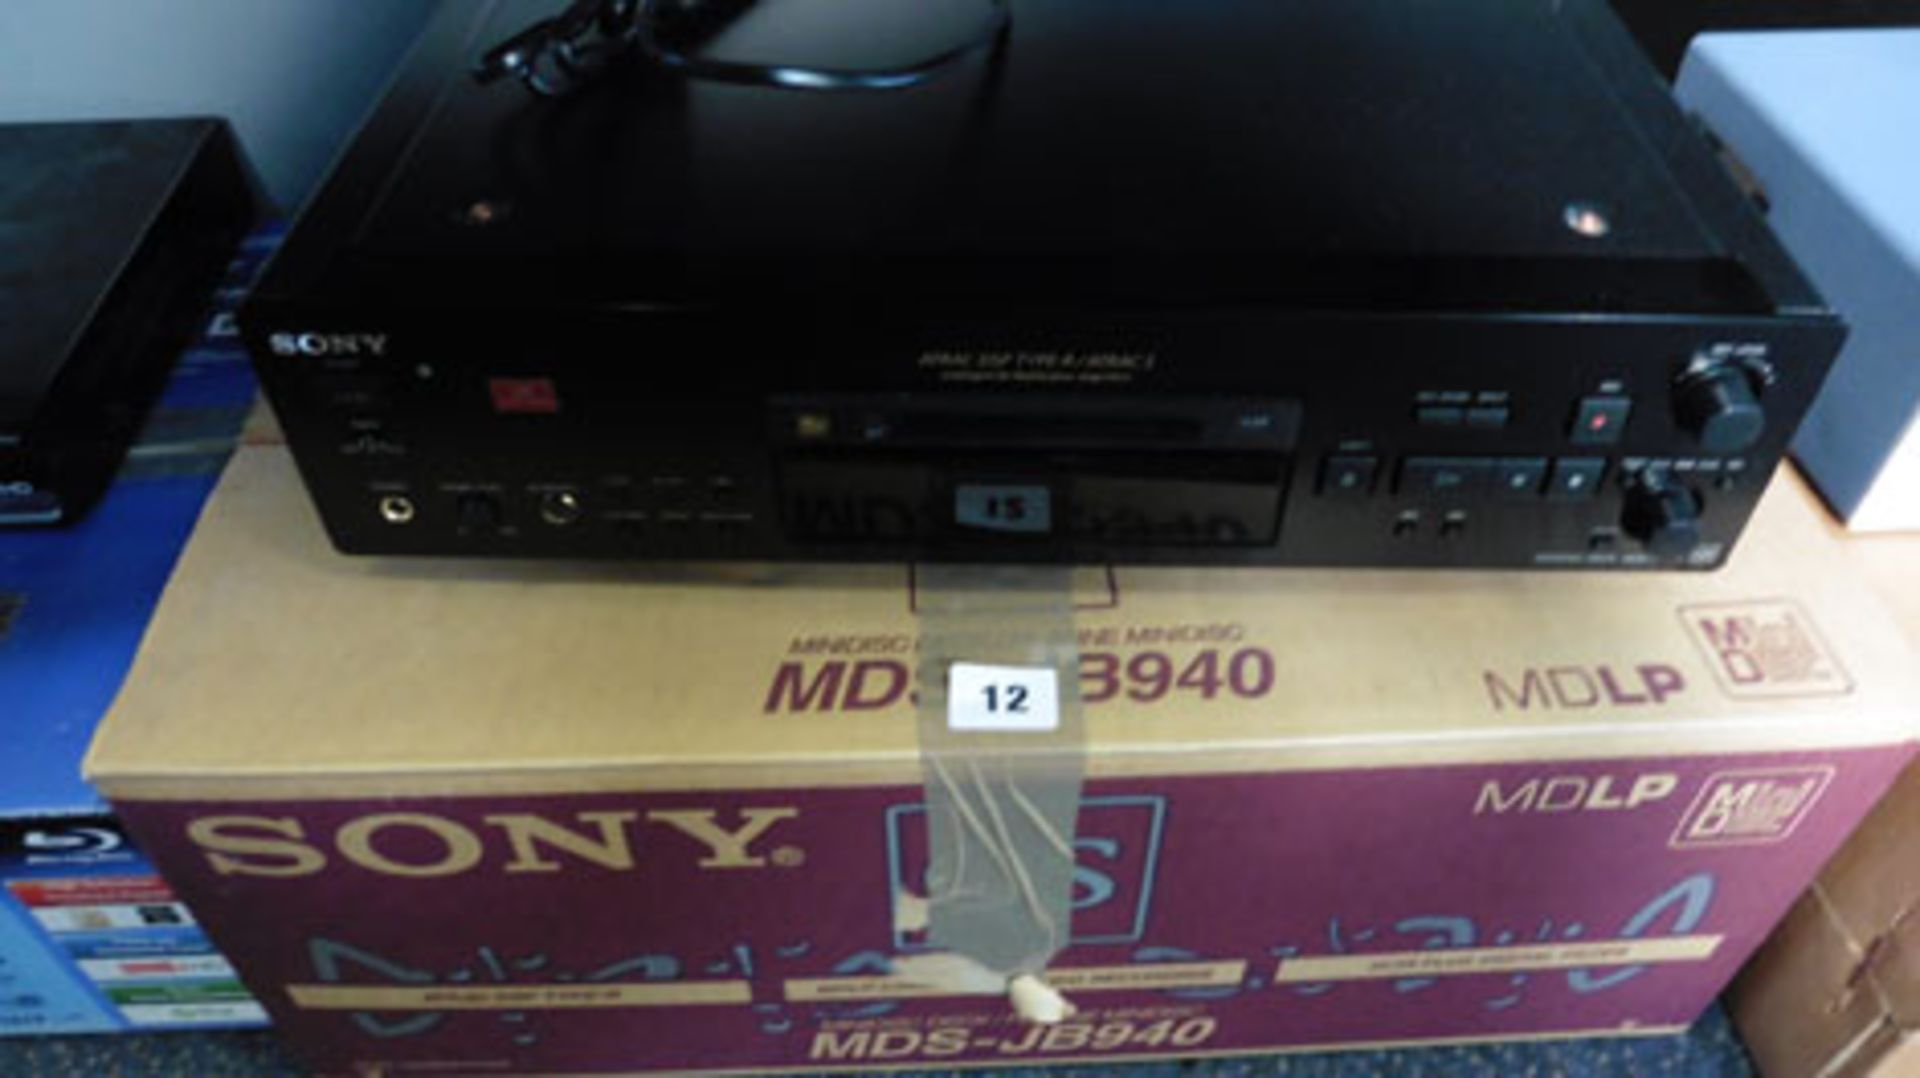 Sony Model MDS-JB940 mini disc deck and box *VAT will not be added to the hammer price of this lot*